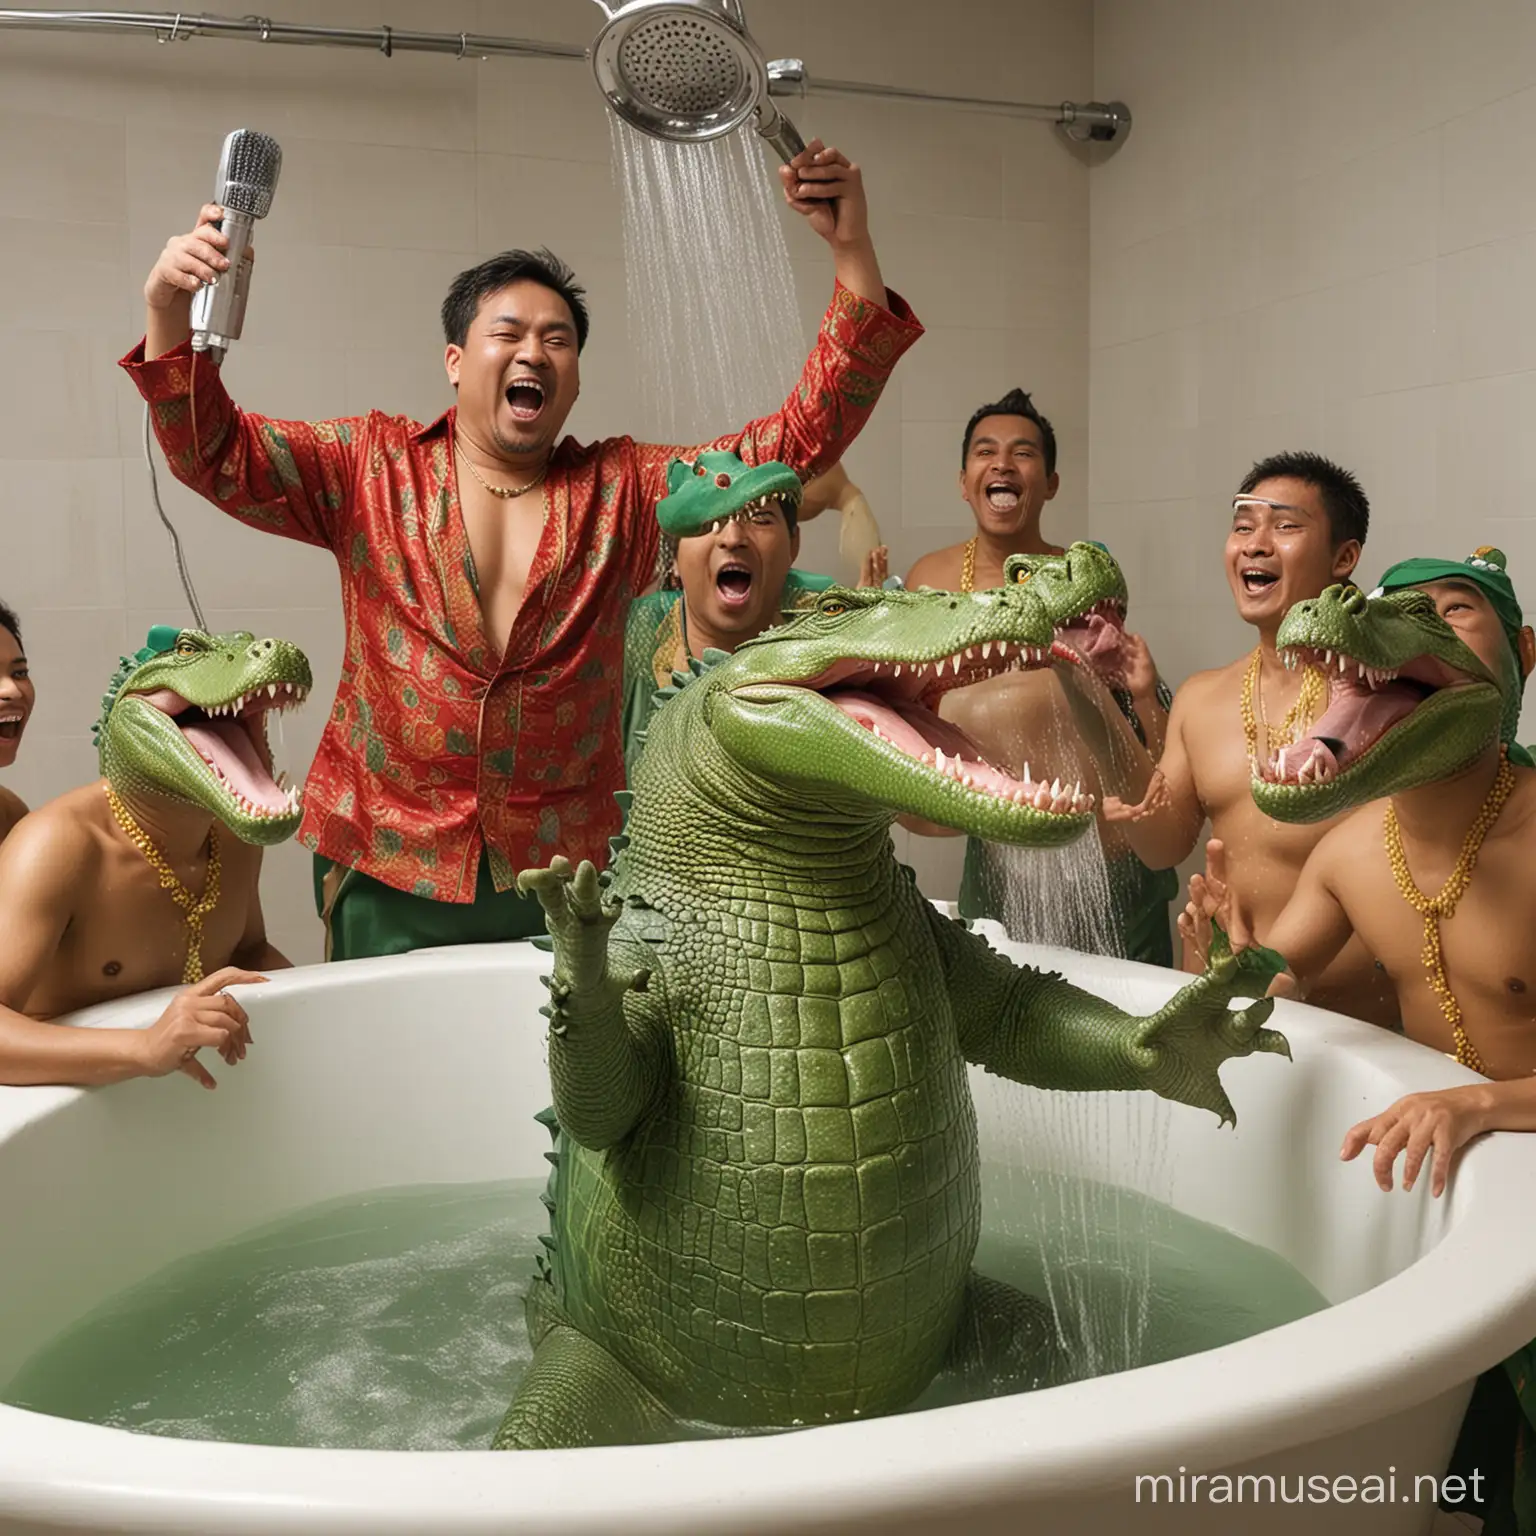 A green crocodile wearing leotard, singing in a bathtub, holding a shower head as microphone, a group of fat men in traditional Malay outfit dancing with him